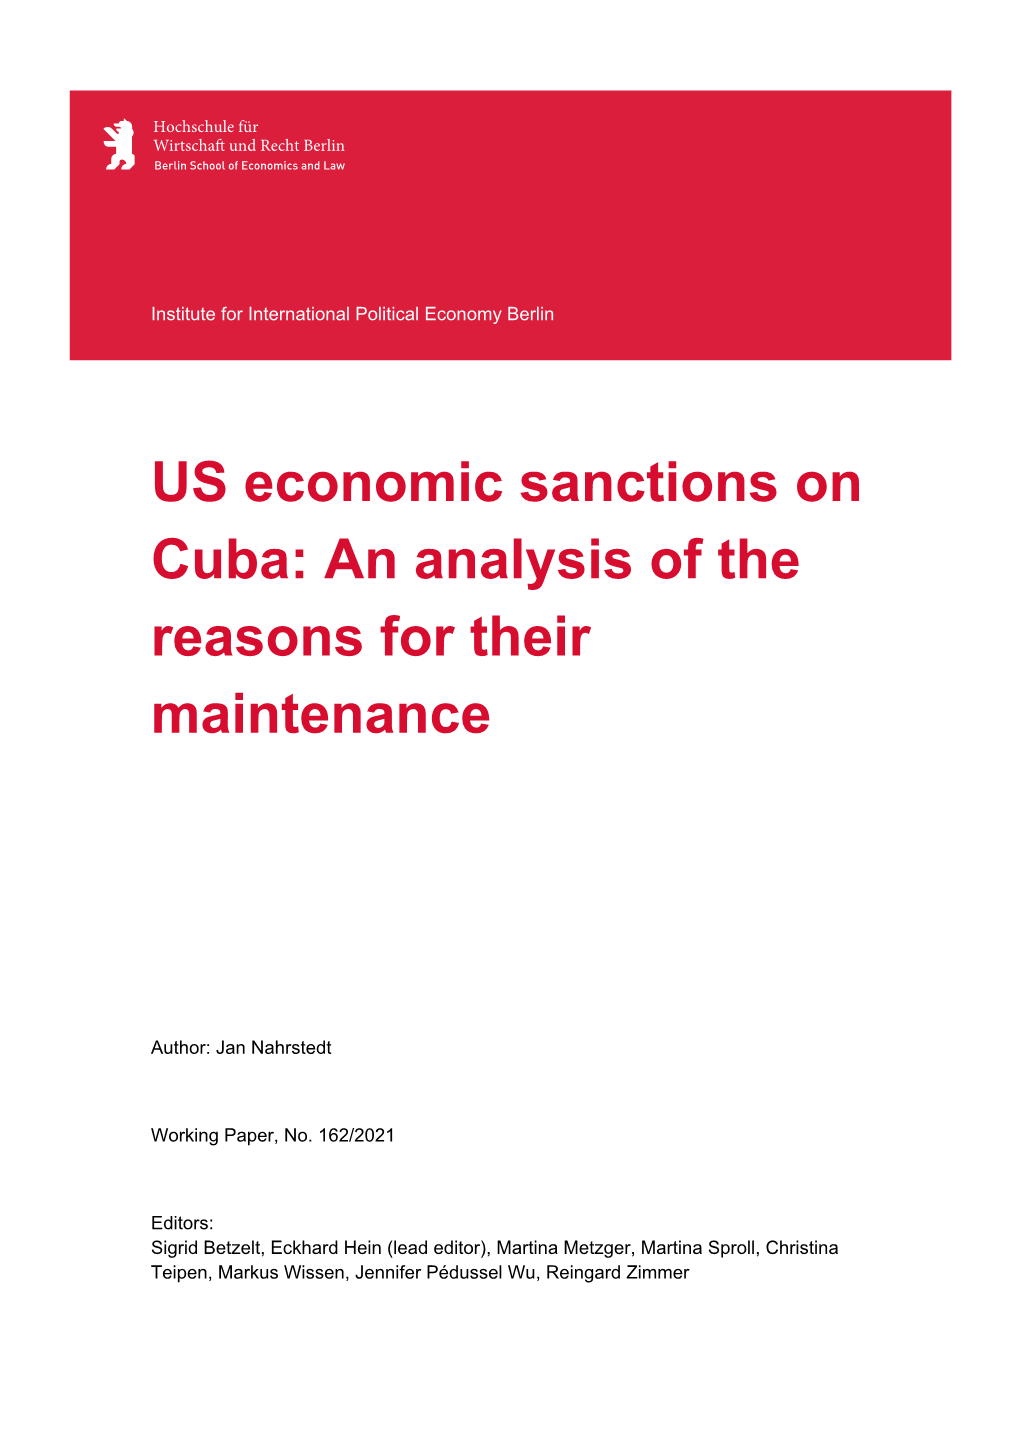 US Economic Sanctions on Cuba: an Analysis of the Reasons for Their Maintenance